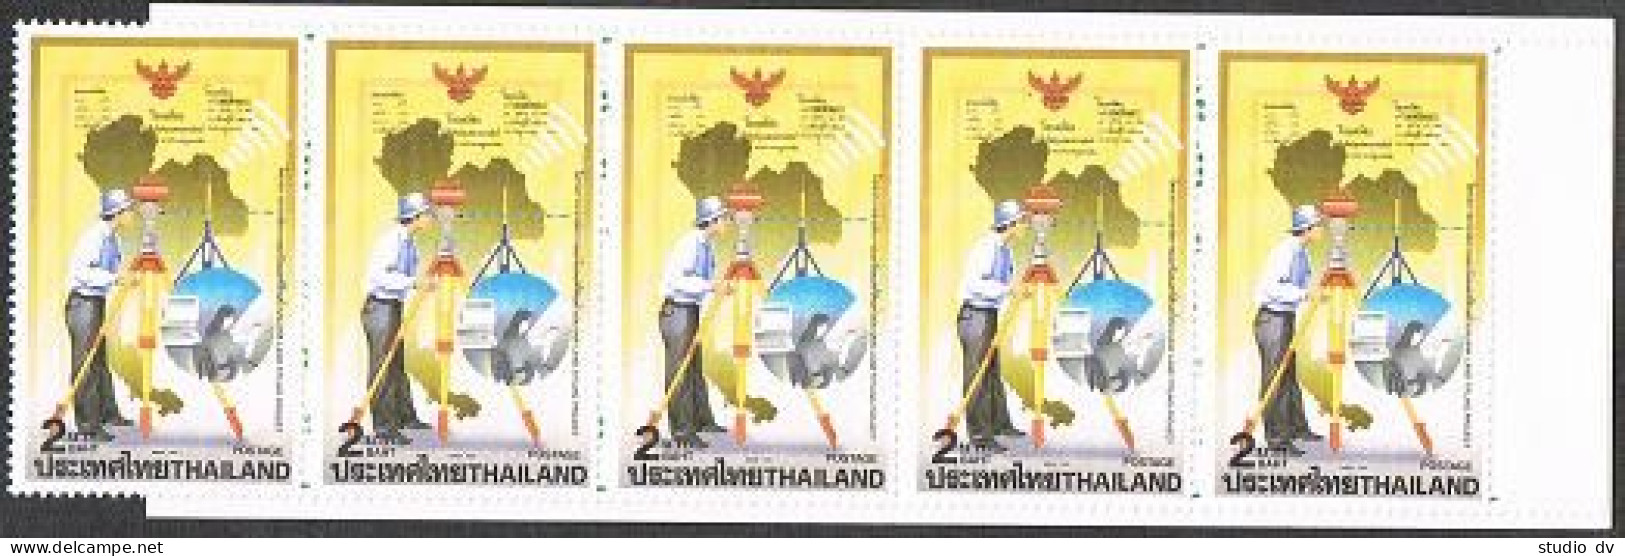 Thailand 1383 Booklet, MNH. Michel 1404 MH. Land Titling Project, 1991.  - Thailand